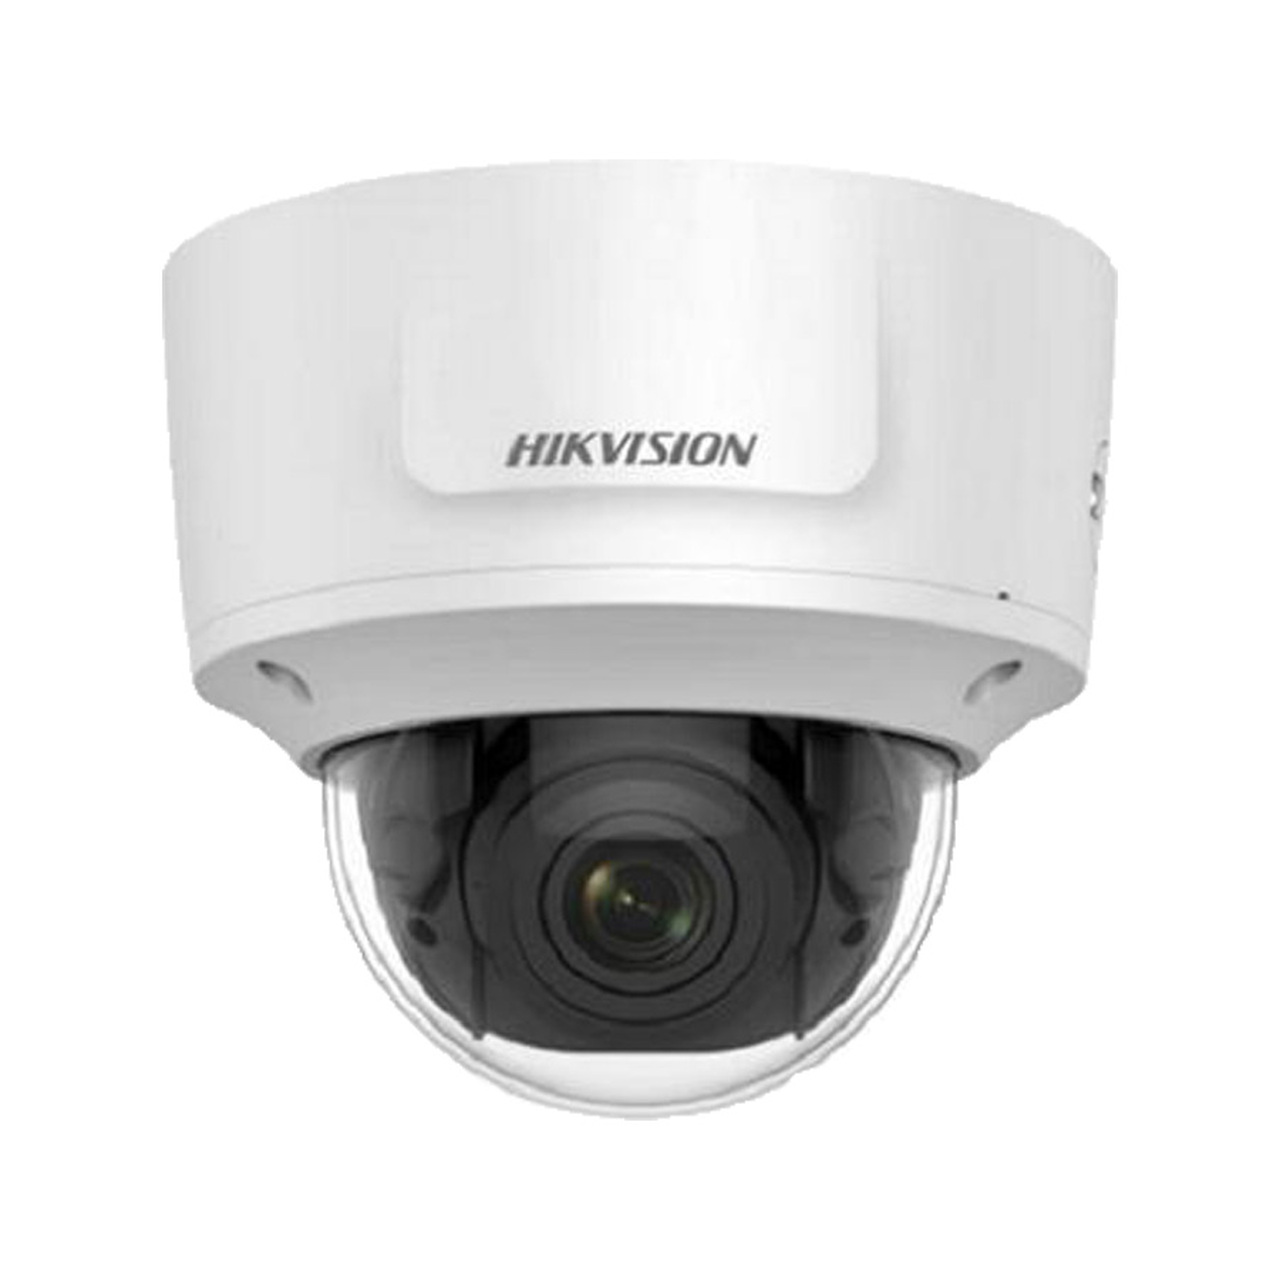 HIKVISION DS-2CD2755FWD-IZS Turbo HD Camera